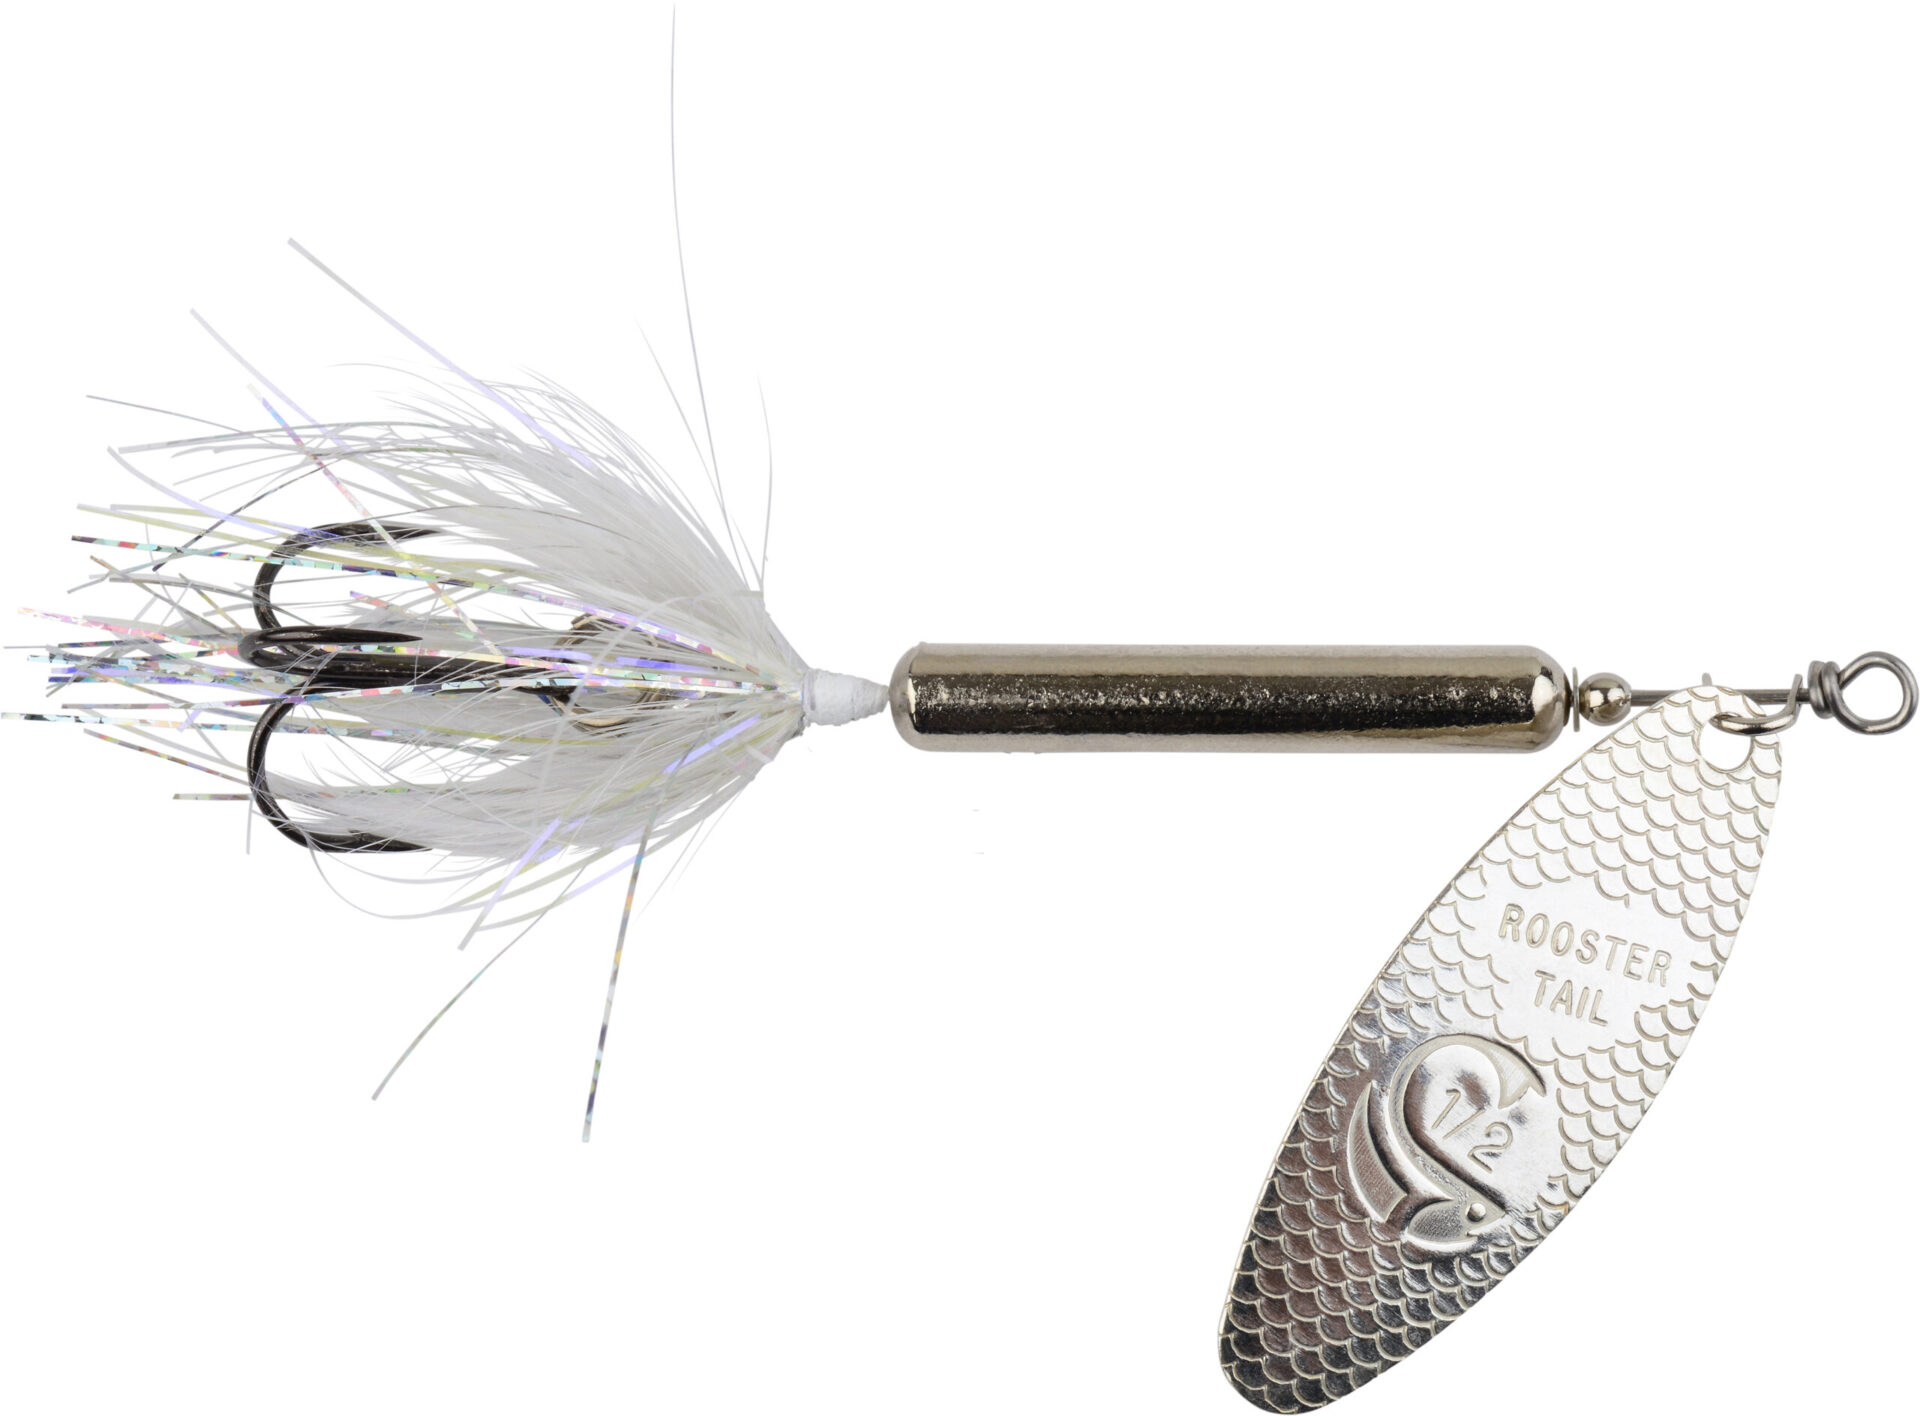 https://www.yakimabait.com/wp-content/uploads/2016/08/products-JOE-THOMAS-PRO-SERIES-ROOSTER-TAIL-CHWT-scaled.jpg